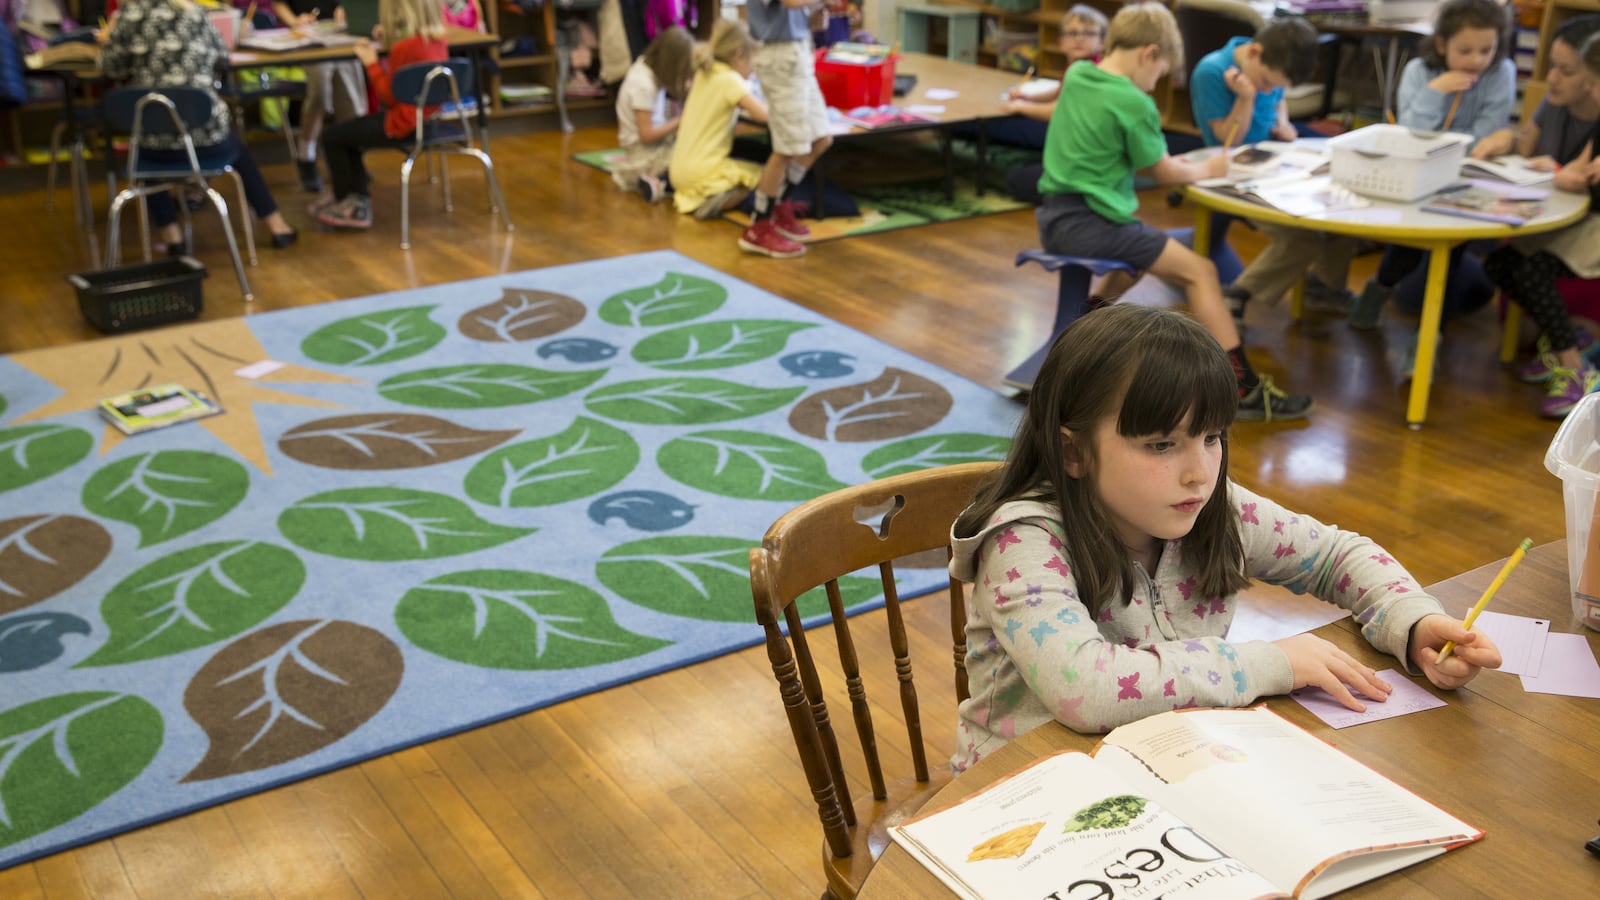 First graders work on coursework at IPS School 84, one of the Center for Inquiry campuses, Indianapolis, Wednesday, May 18, 2016. Ethnically, the Center for Inquiry School 84 is one of the least diverse in the IPS system, and enrollment priority is given to kids living near its Meridian-Kessler location.